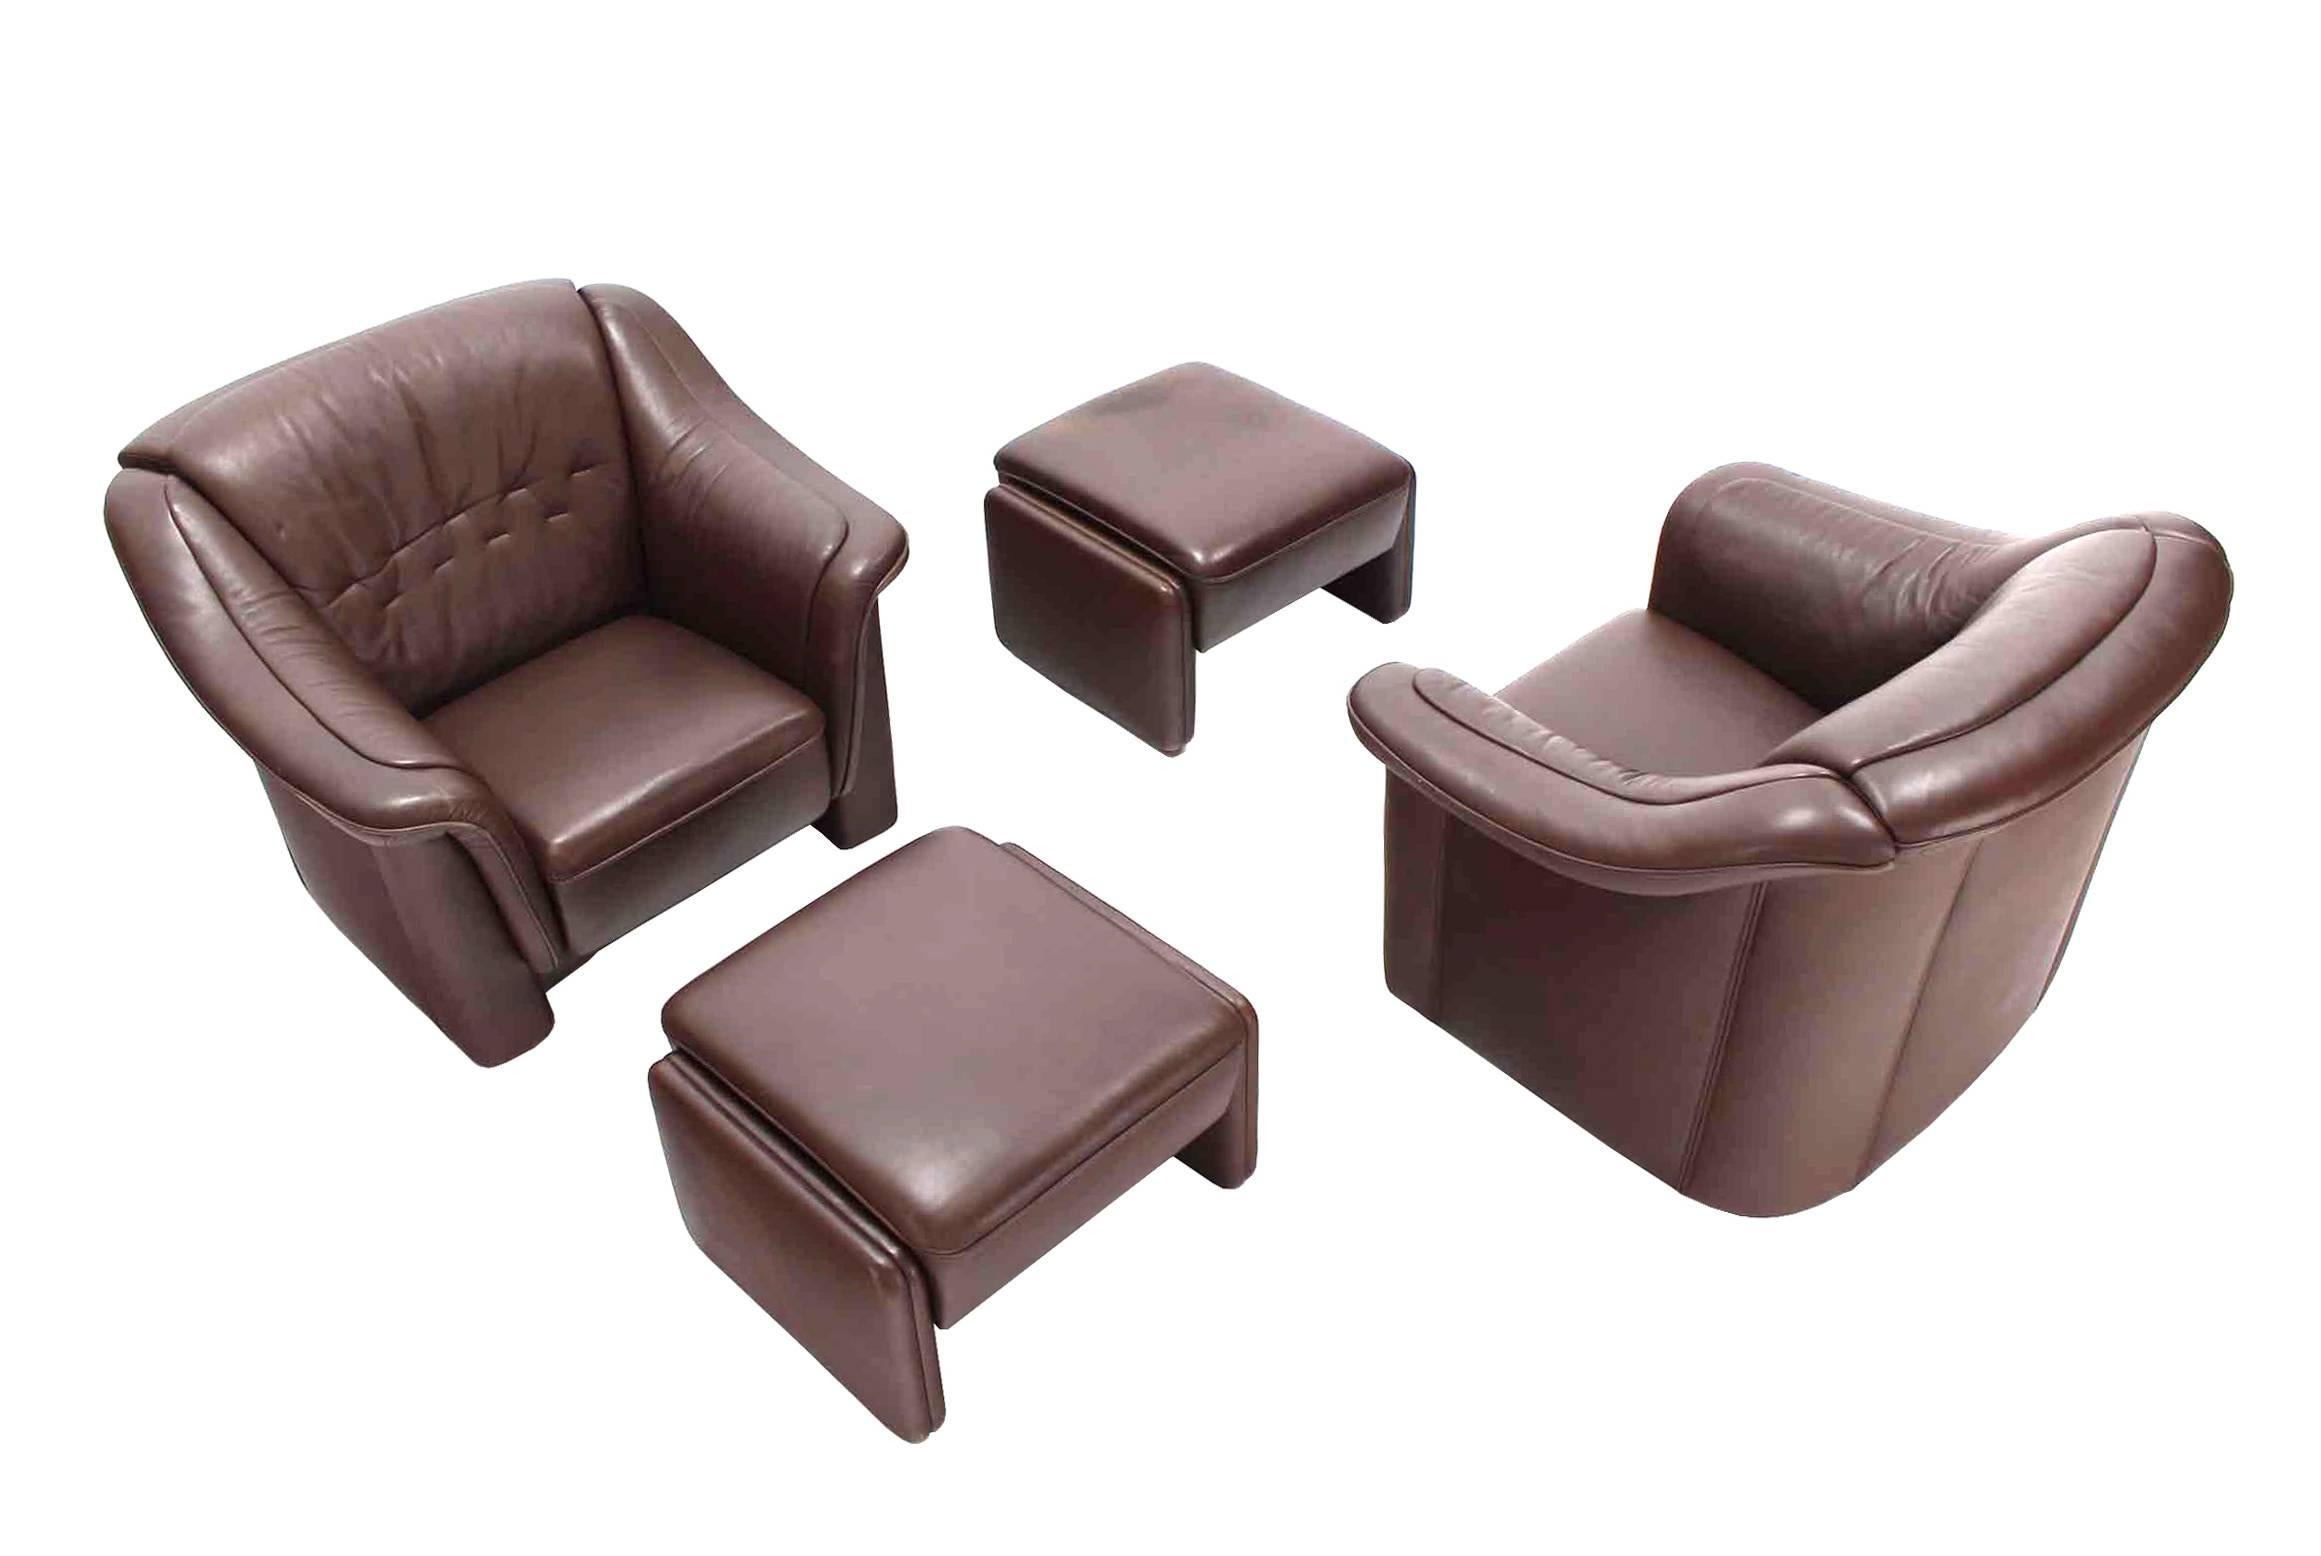 Pair of Brown Leather Lounge Chairs with Ottomans 1